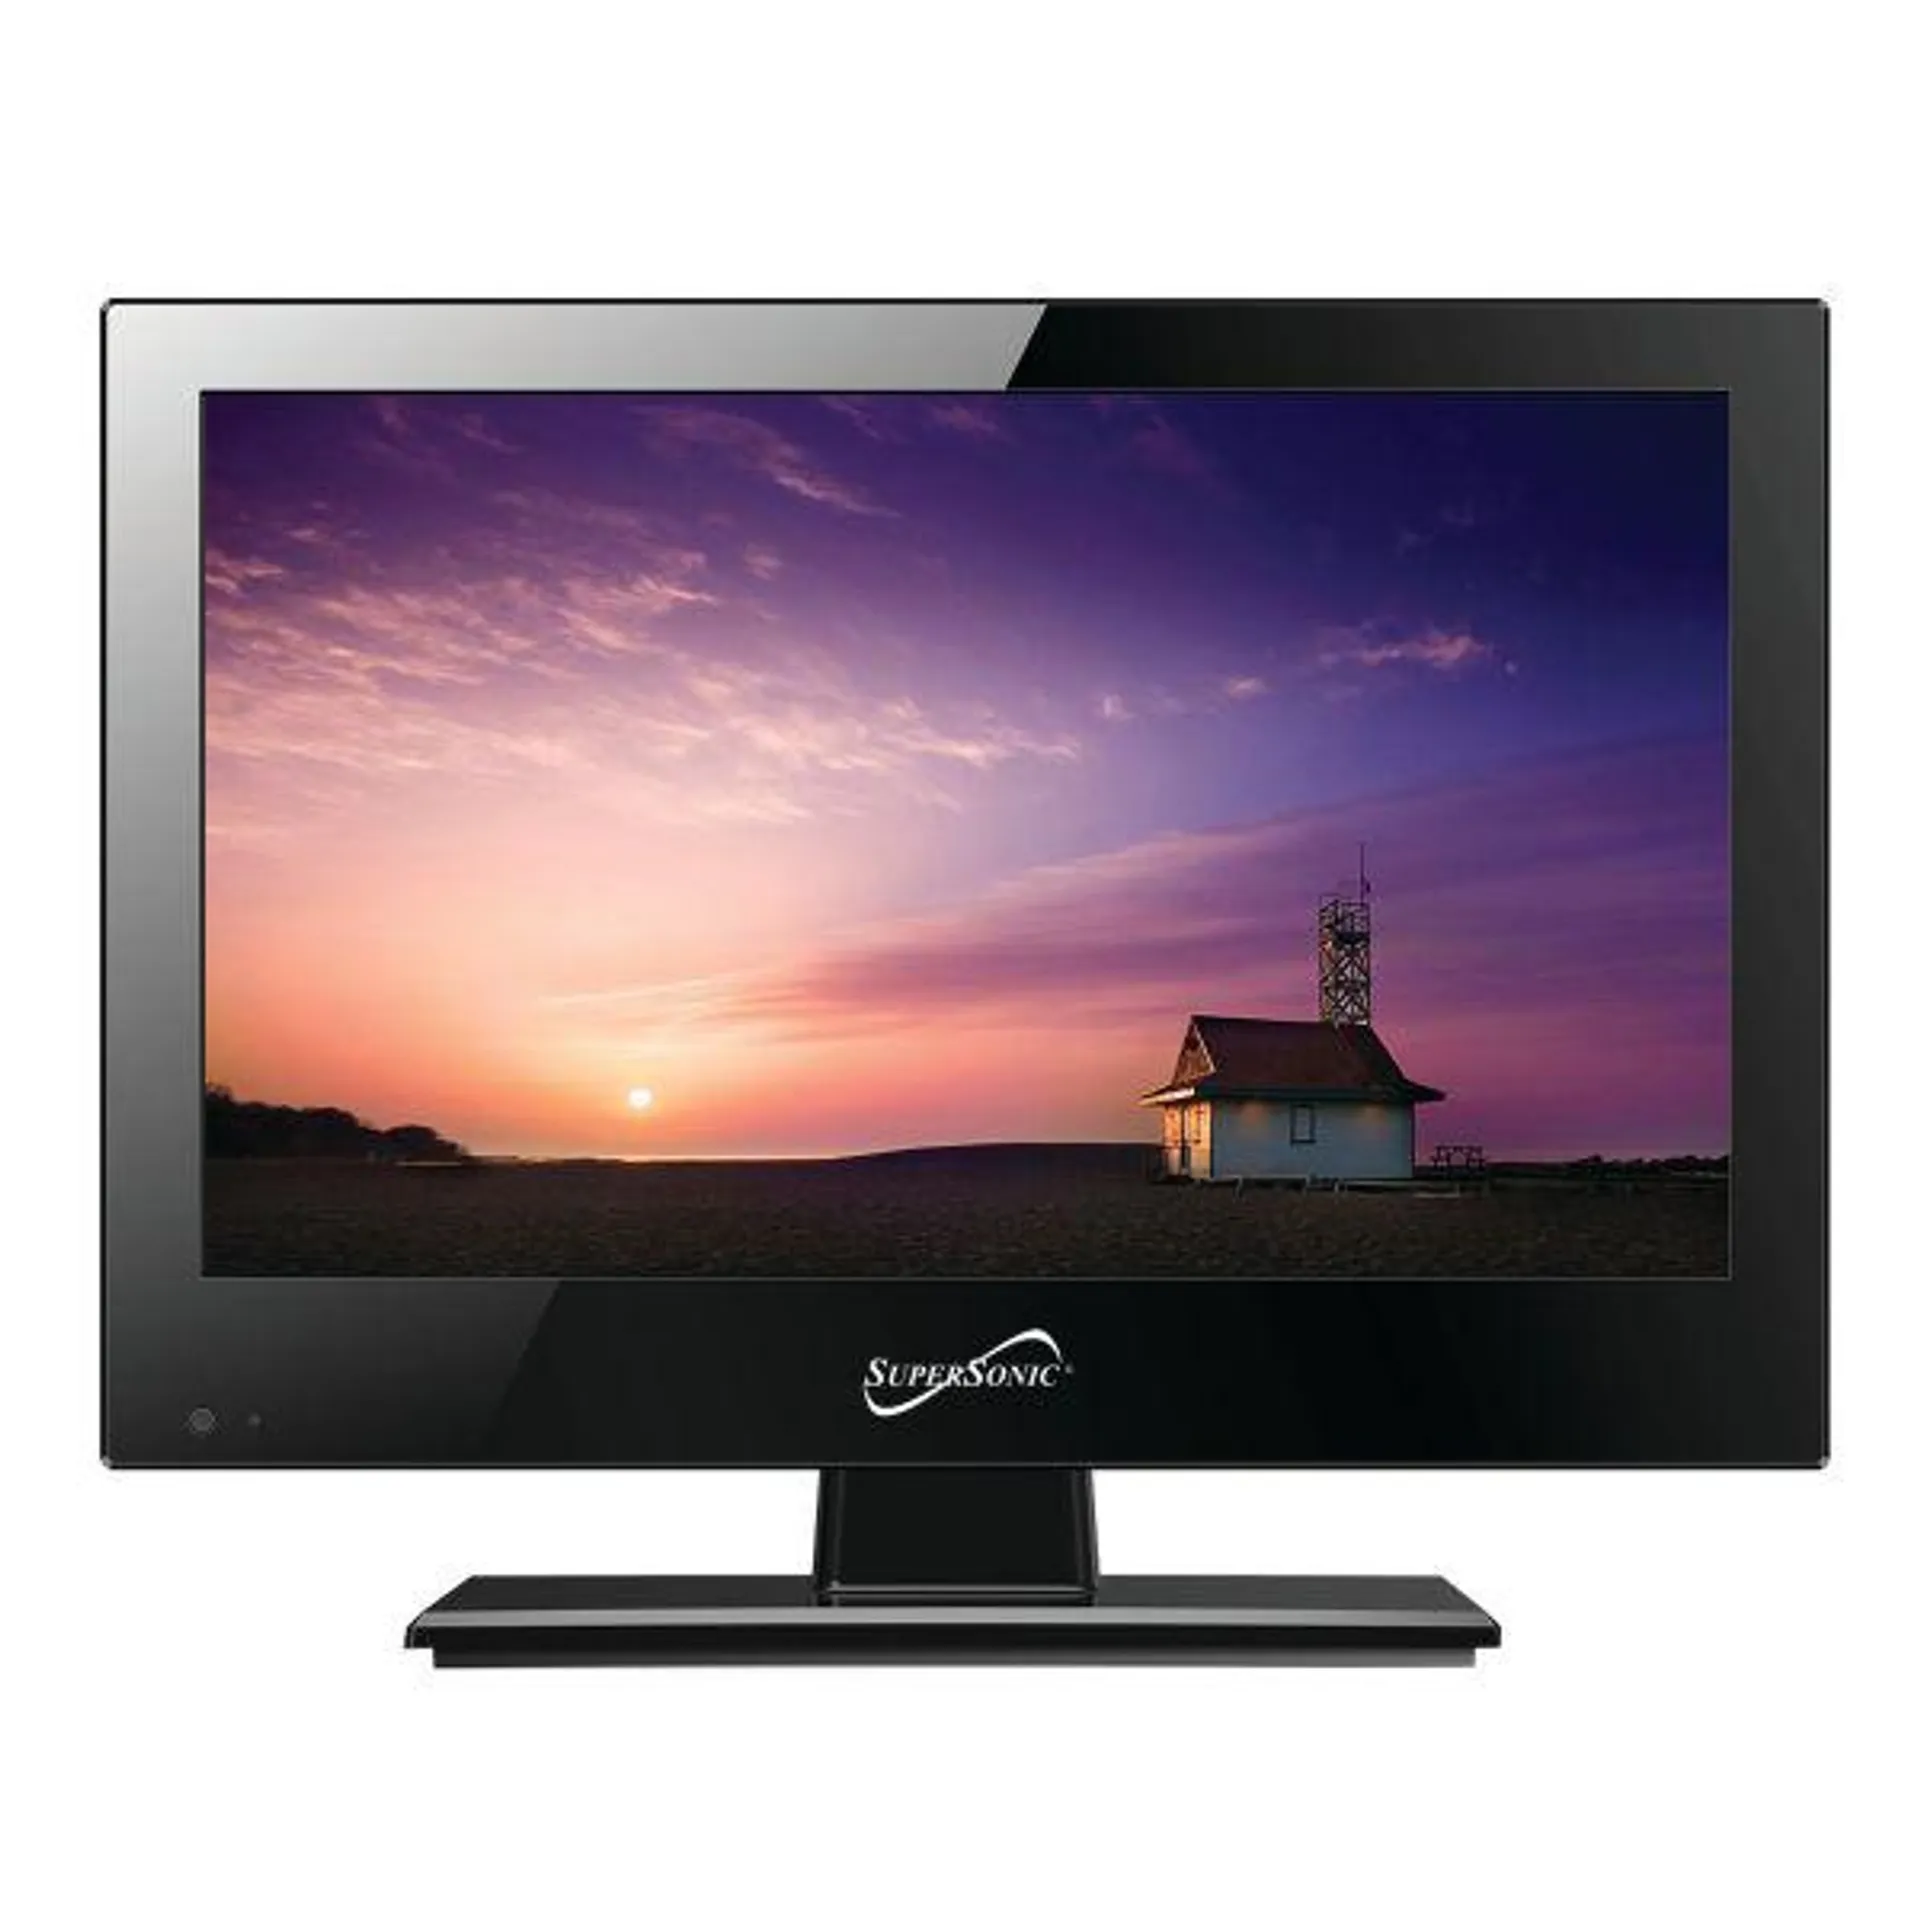 Supersonic 13" HD LED 720p 5ms TV